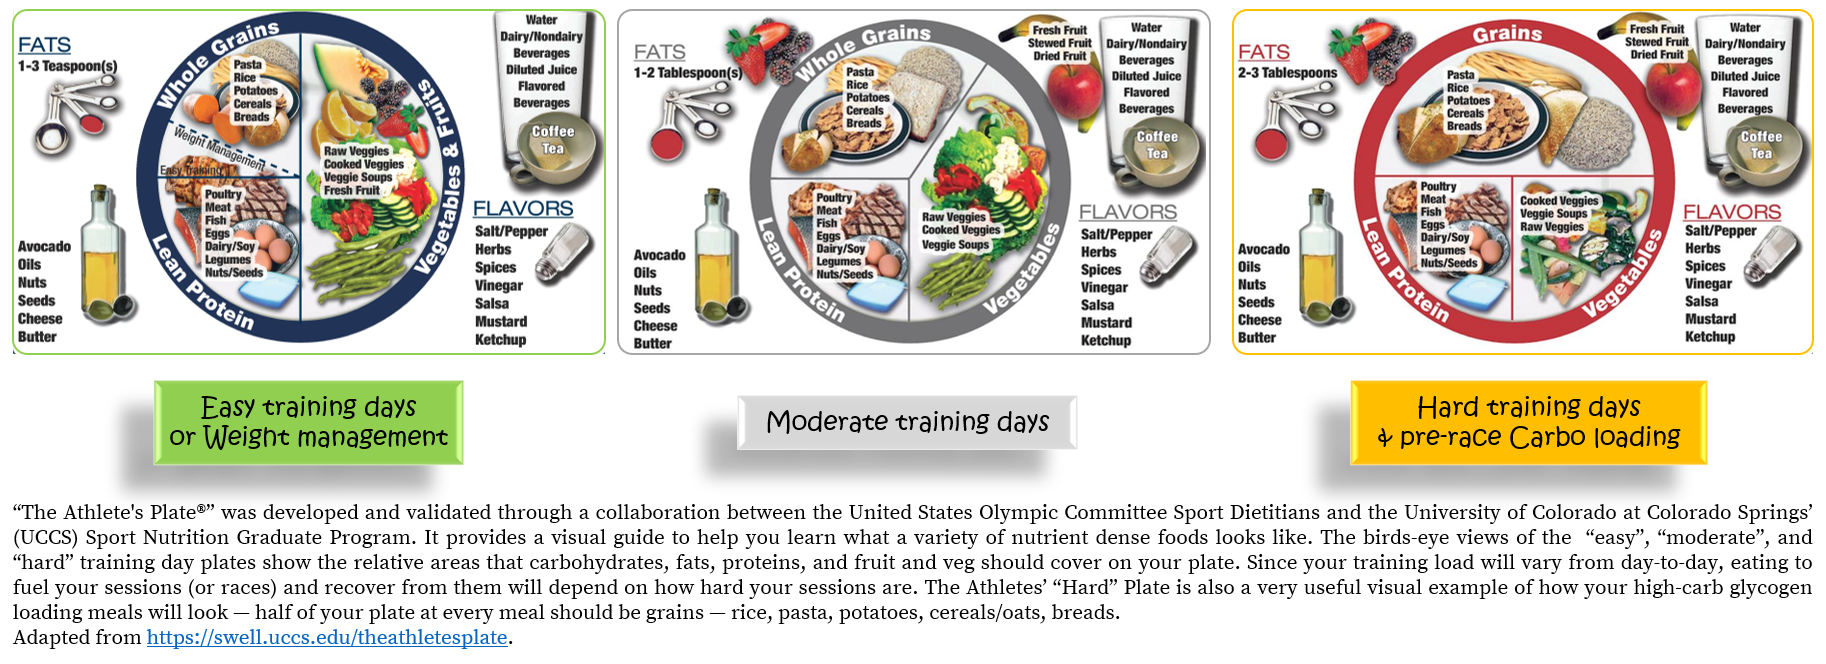 The athletes’ plates for muscle glycogen supercompensation for runners and obstacle course race athletes from Thomas Solomon.